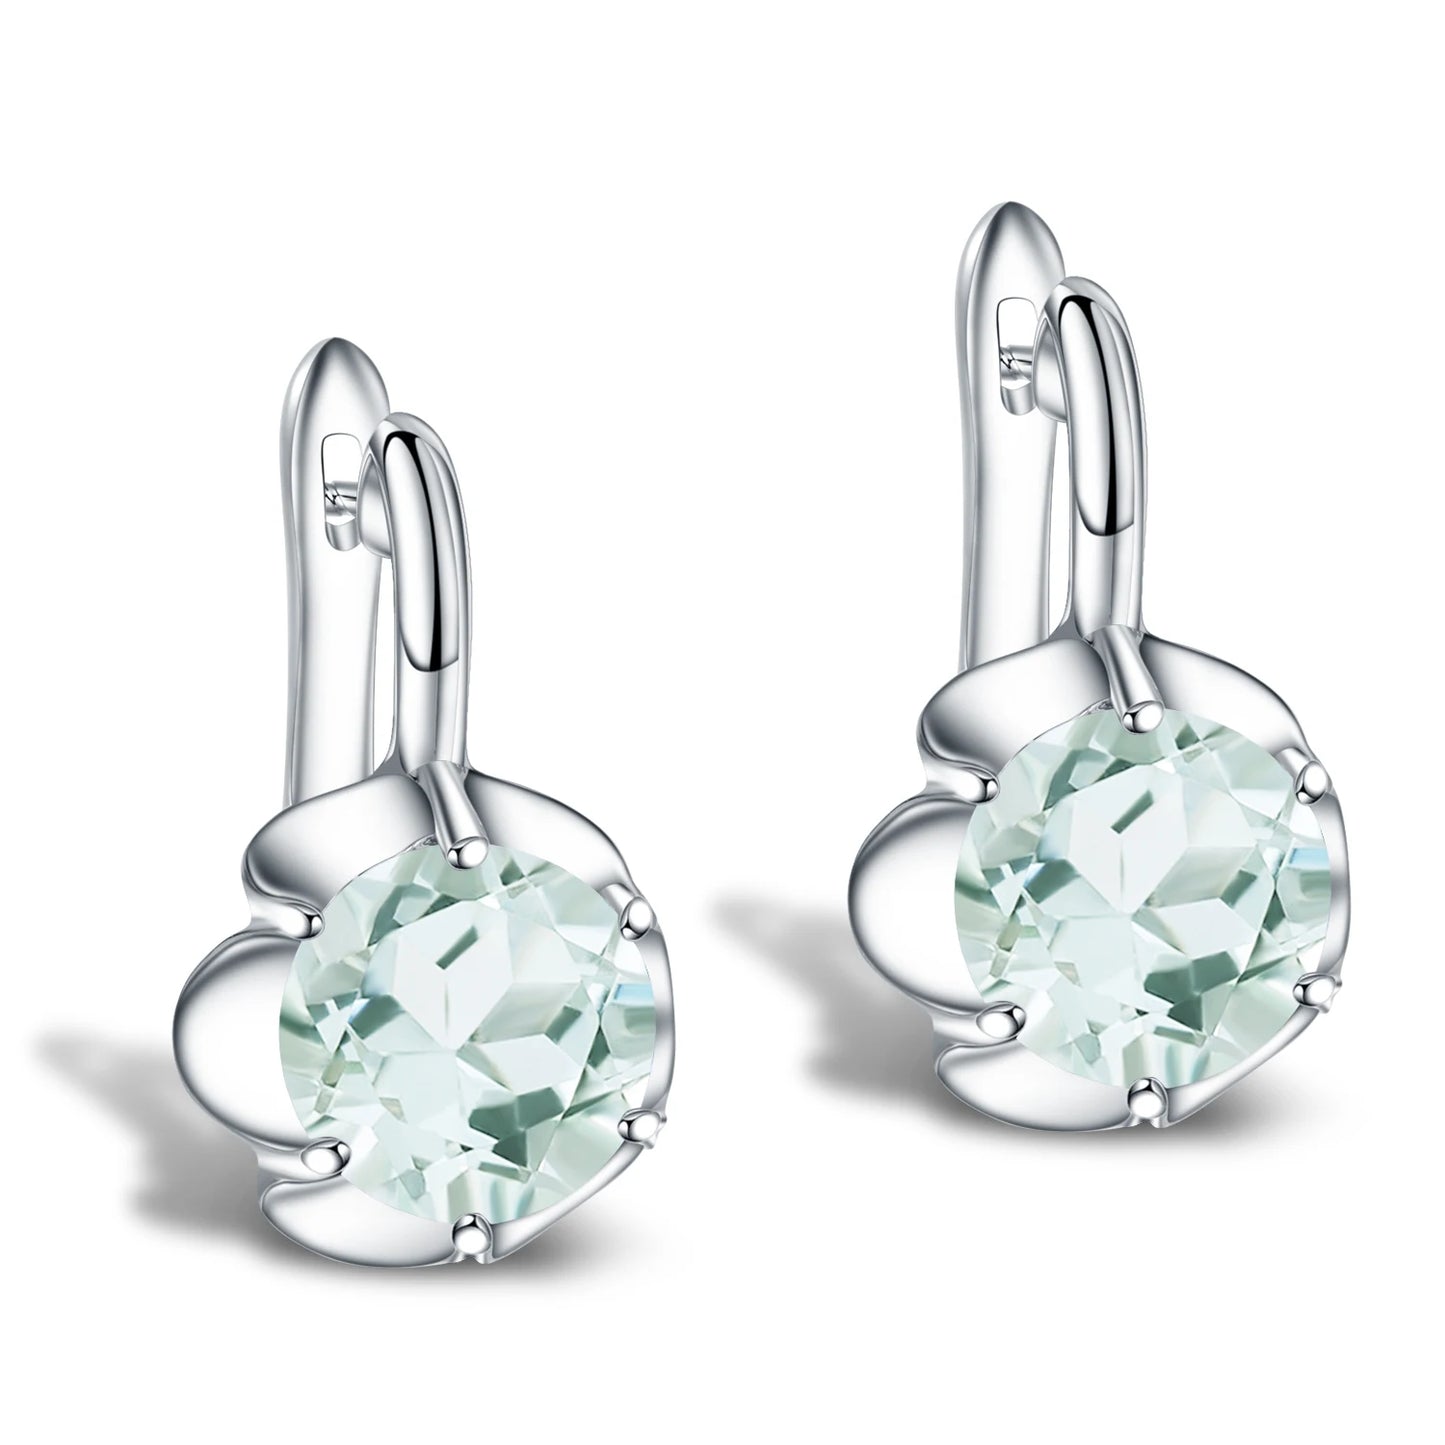 GEM'S BALLET Pure 925 Sterling Silver Fine Jewelry Oval 5.47Ct Natural Green Amethyst Birthstone Stud Earrings For Women Green Amethyst 925 Sterling Silver CHINA